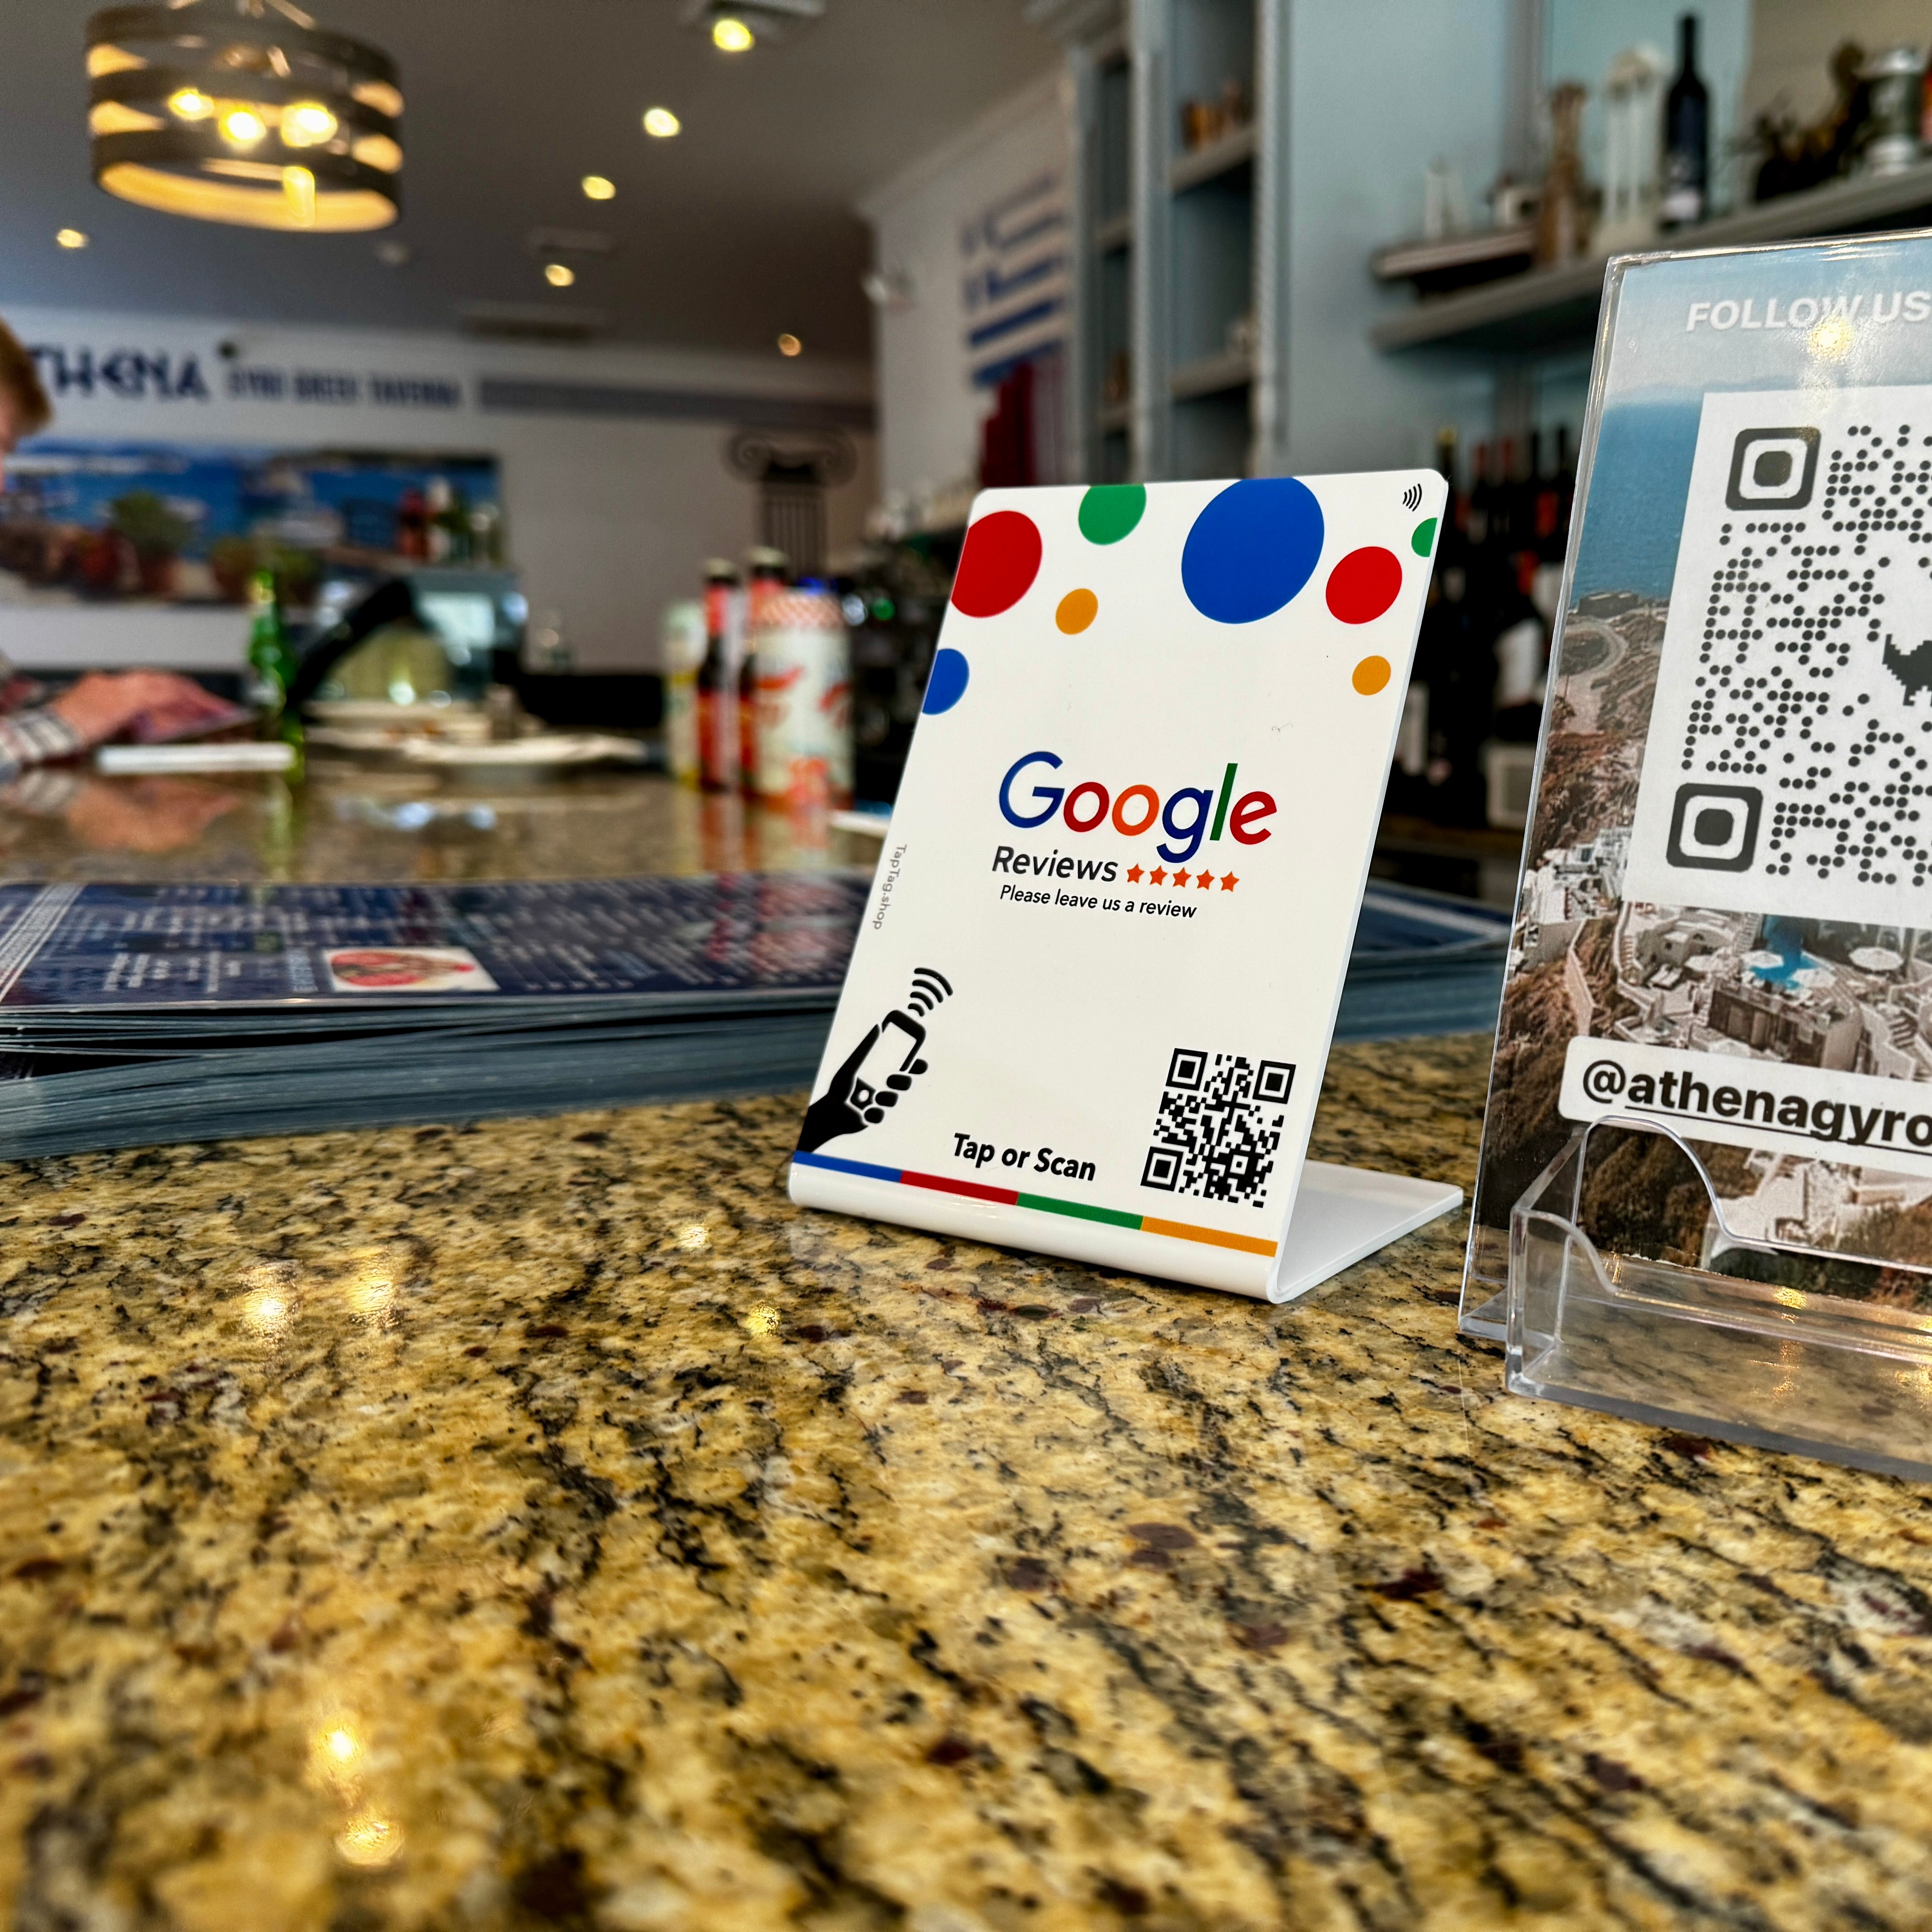 Google sign with QR that can also tap to a smartphone